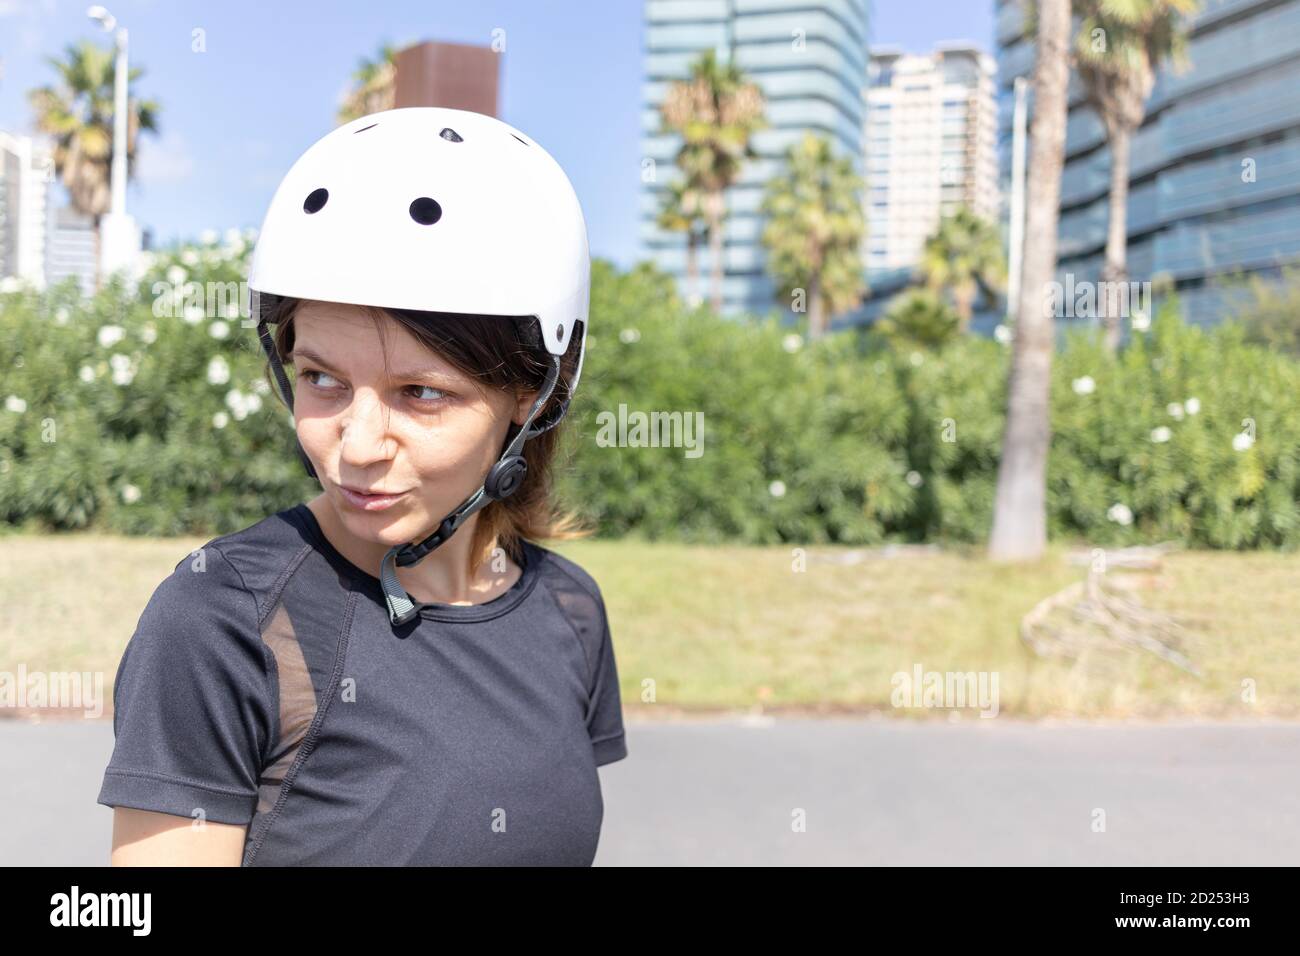 Young roller skater caucasian woman in the white helmet and black sporty clothes on a sunny day in the skatepark, urban environment Stock Photo